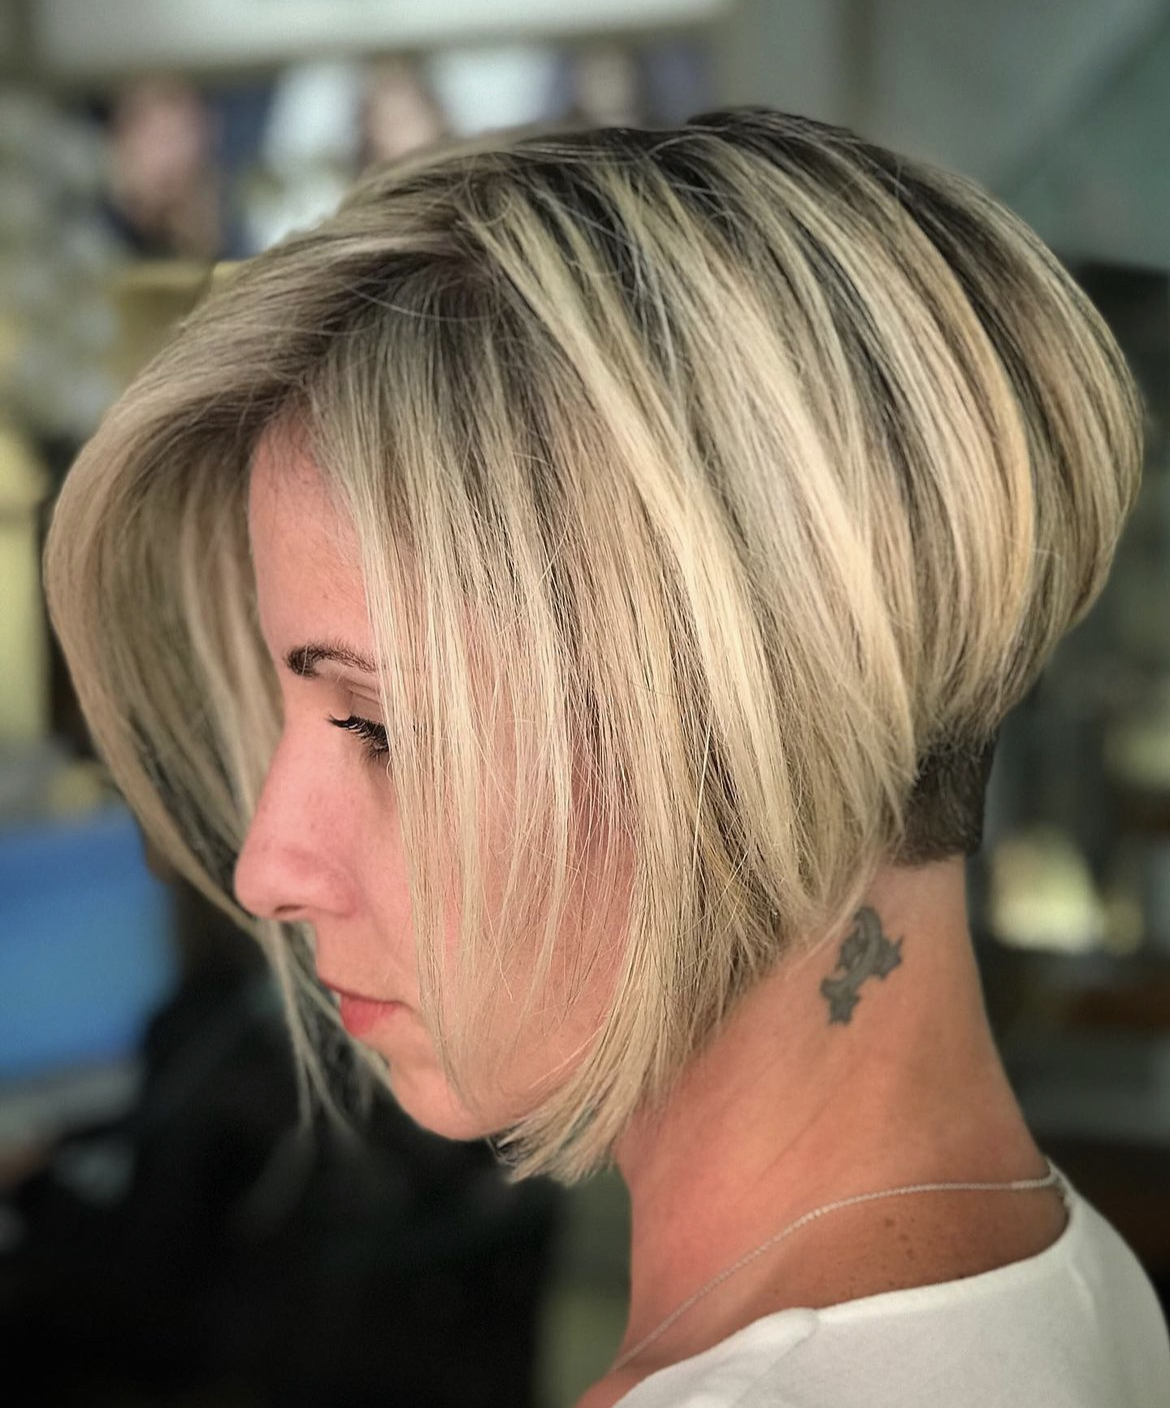 What Are The Best Short Hair Styles? | Paula Young Blog